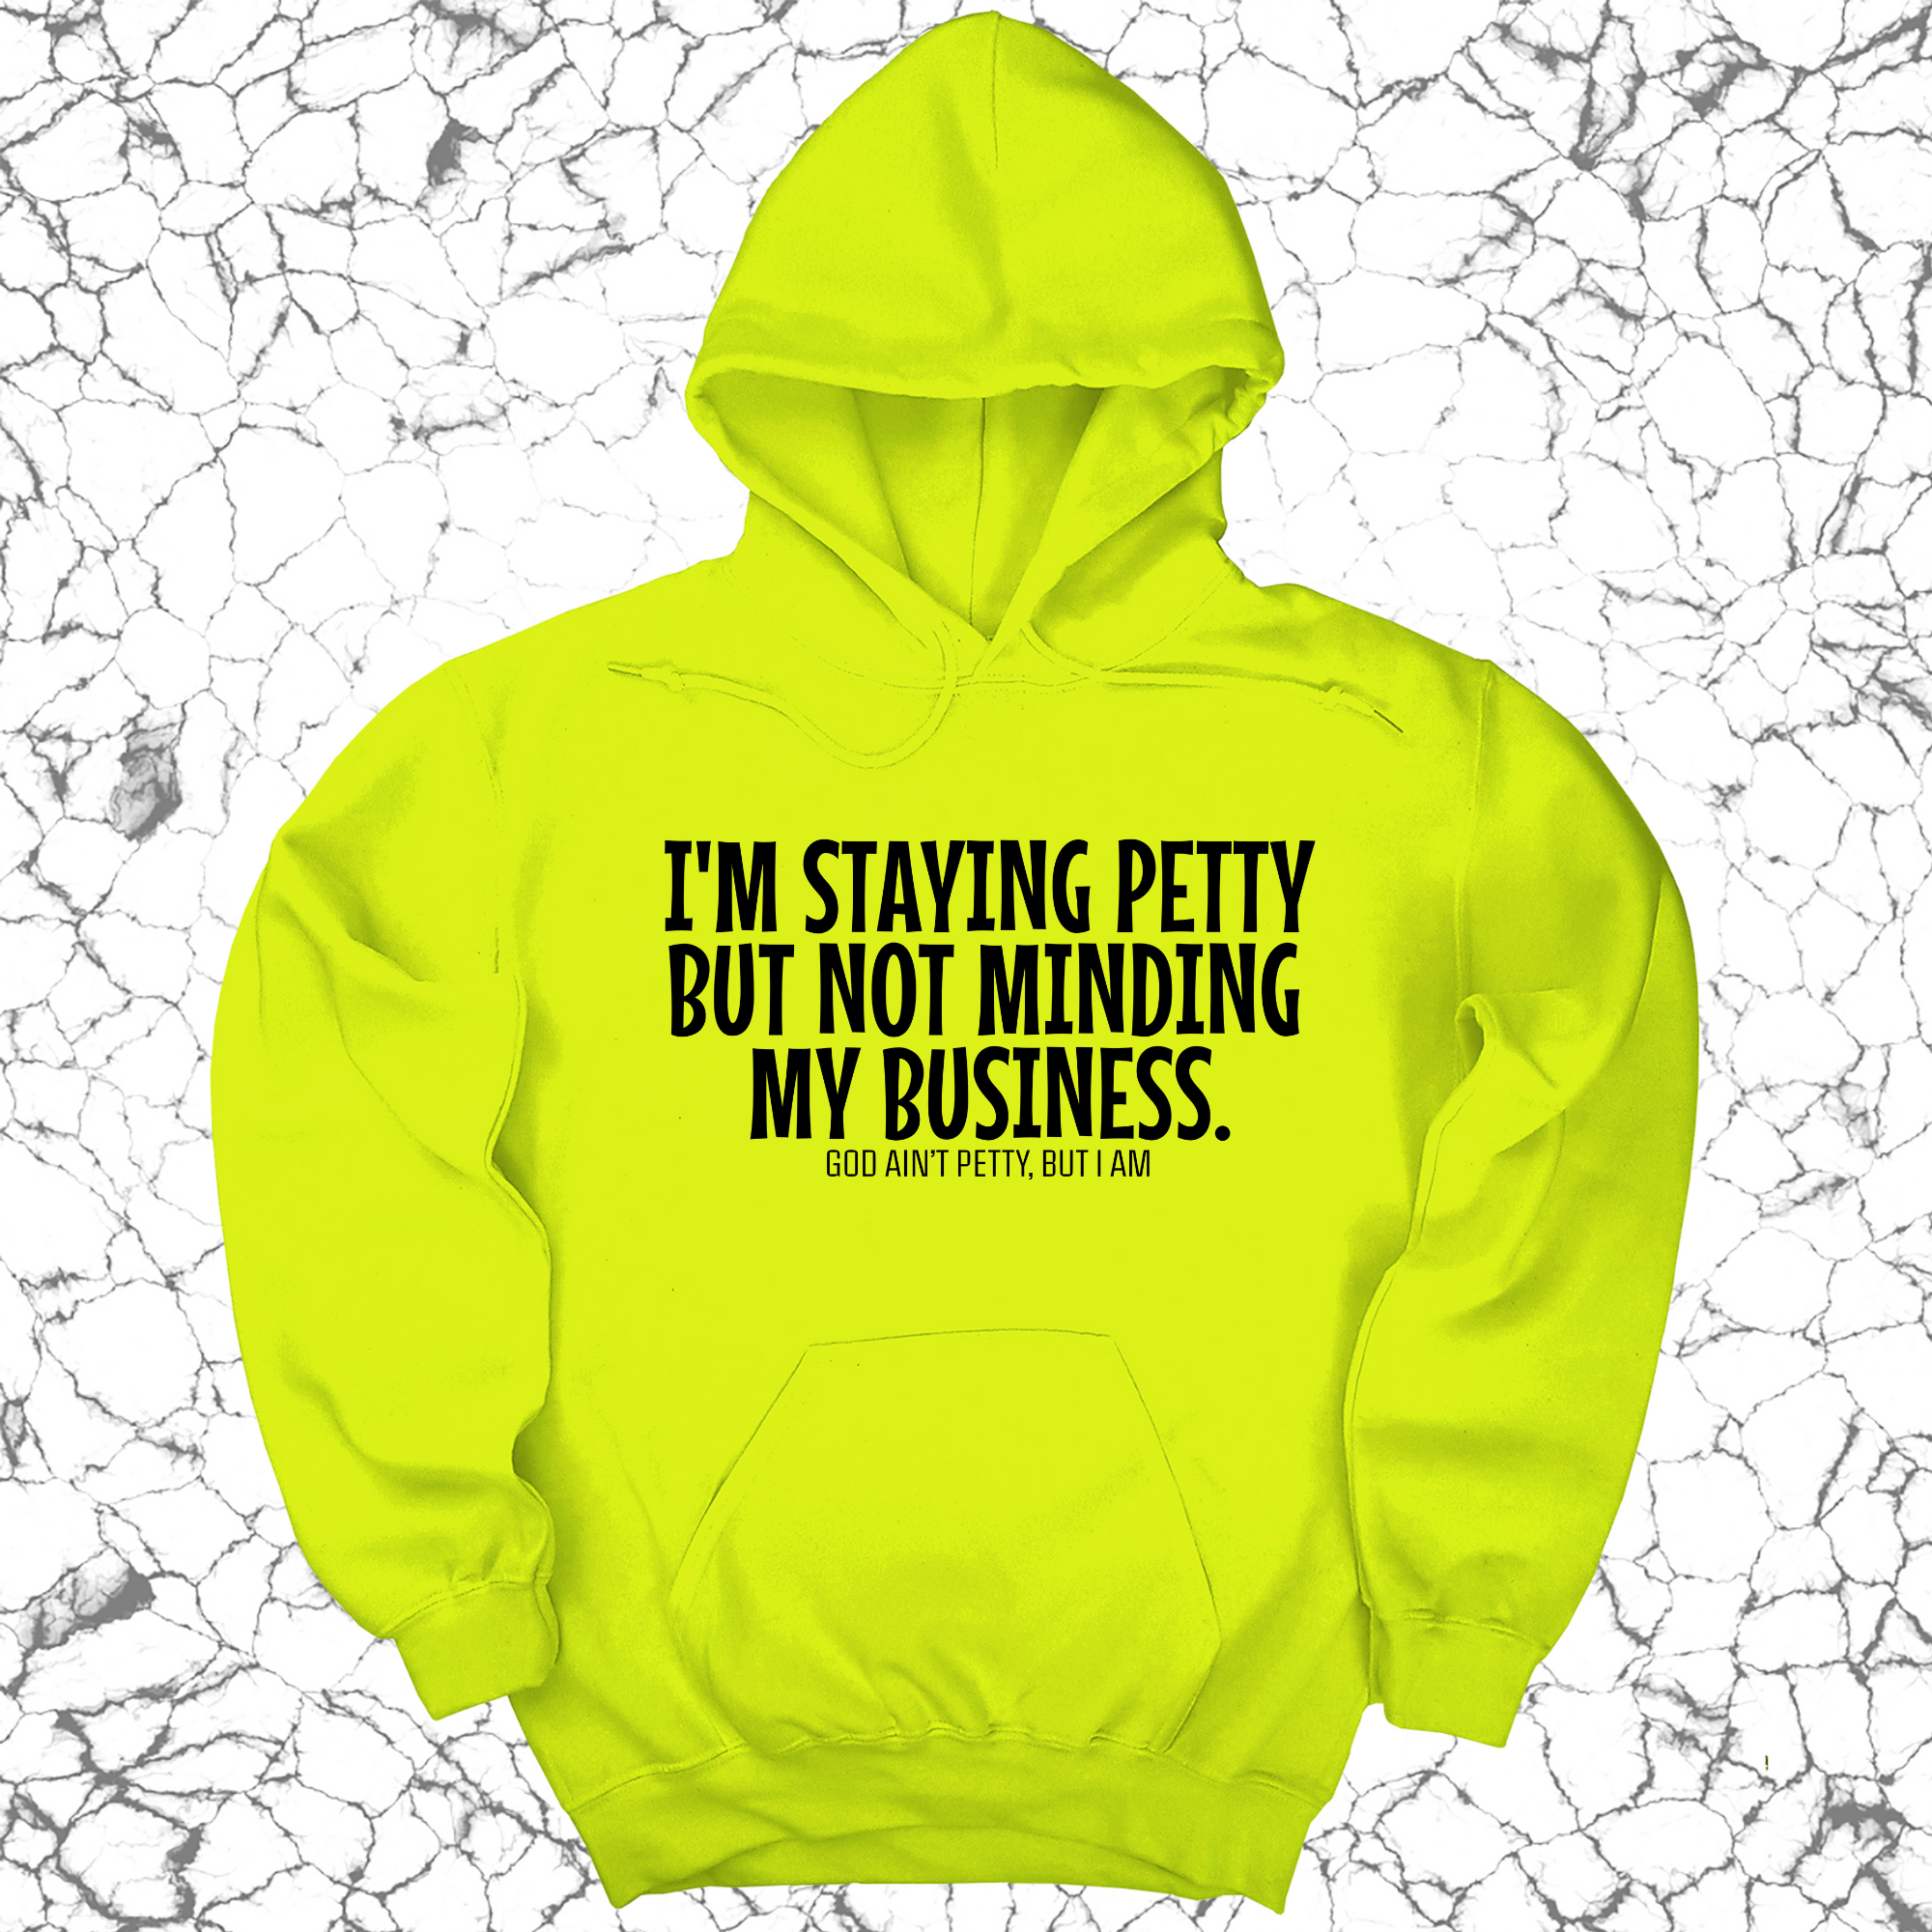 I'm Staying Petty But Not Minding My Business Unisex Hoodie-Hoodie-The Original God Ain't Petty But I Am